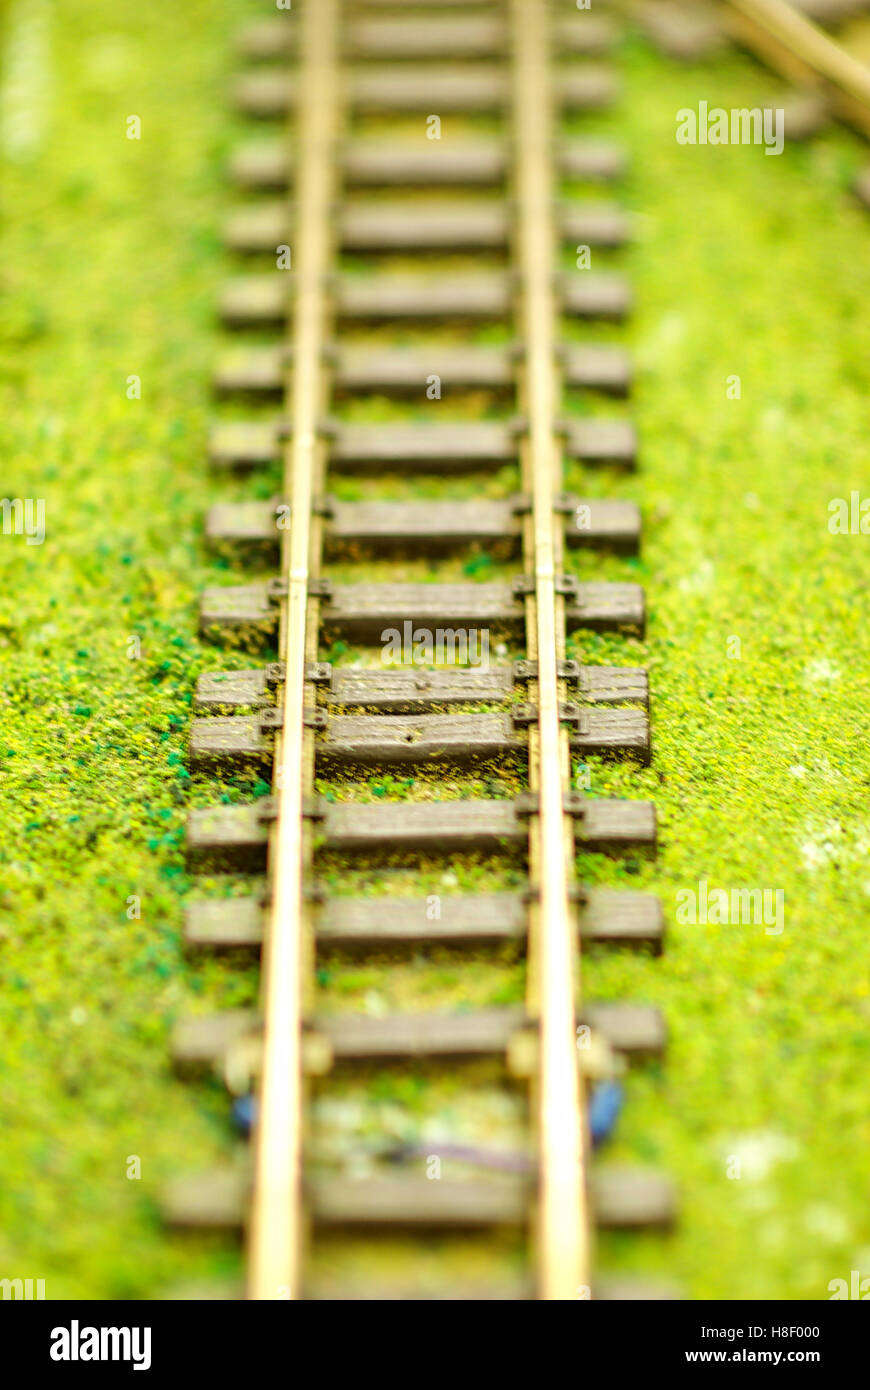 Close-up image of model railroad tracks on fake grass with shallow depth of field. Stock Photo